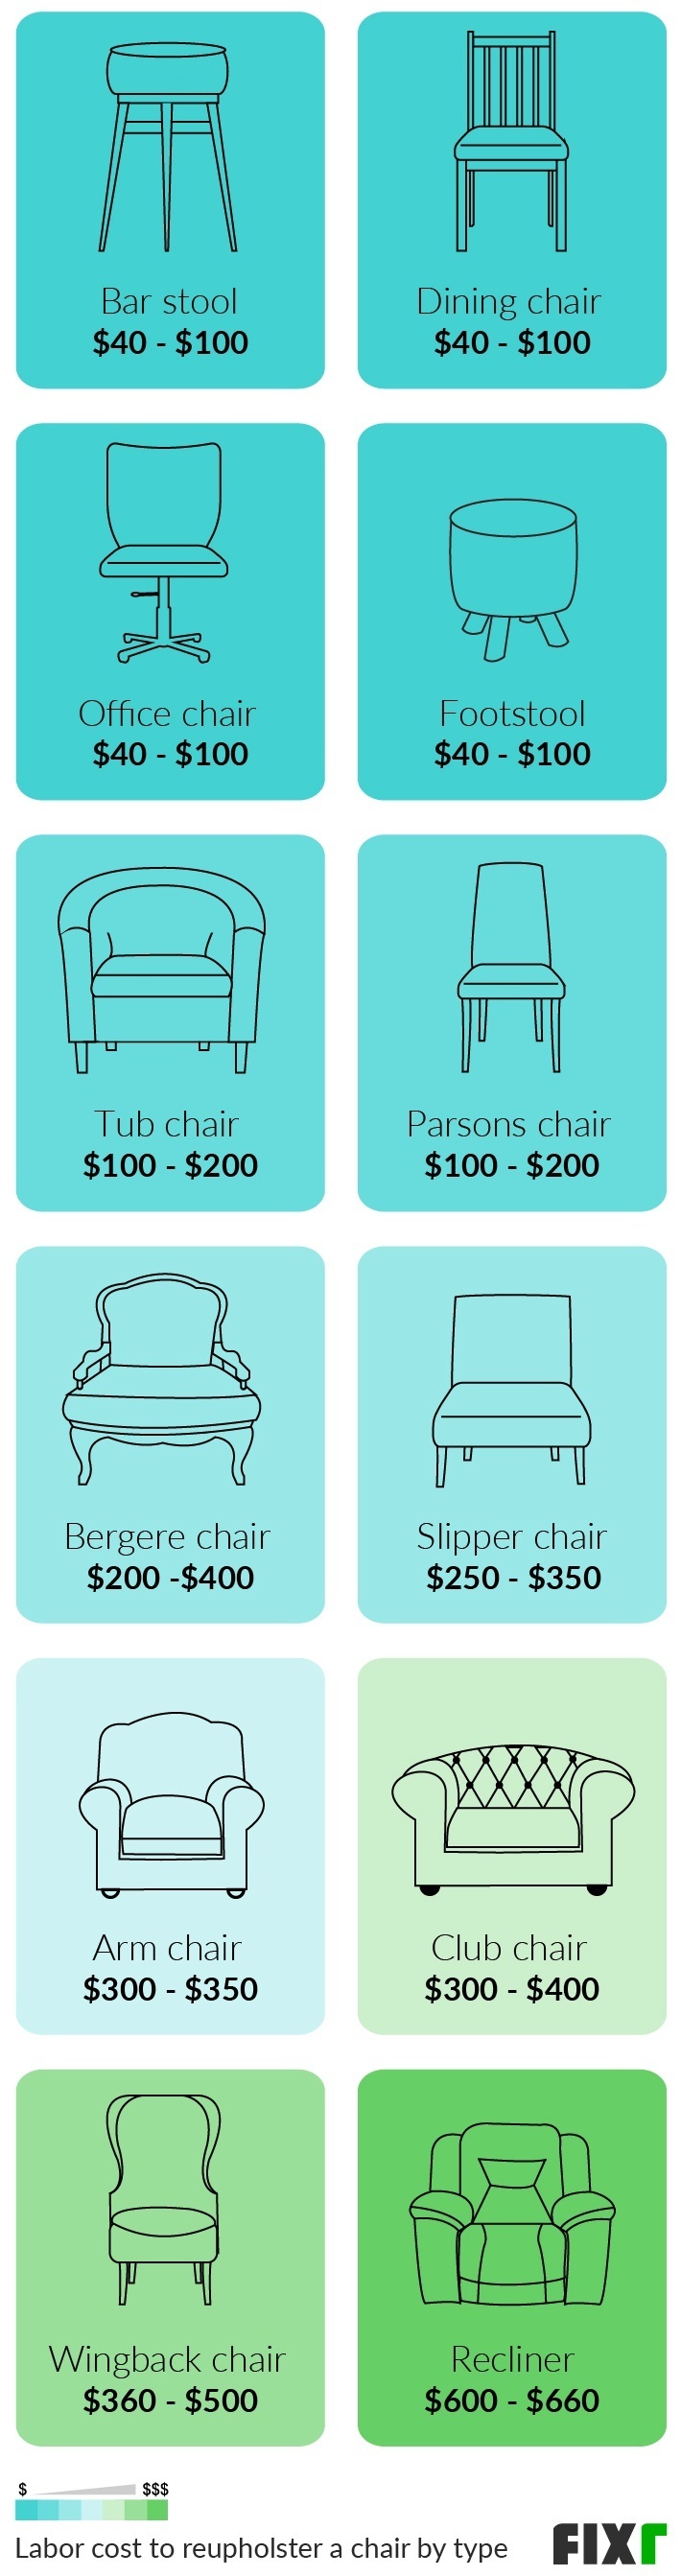 2021 Cost To Reupholster A Chair, How Much Does It Cost To Reupholster A Leather Chair